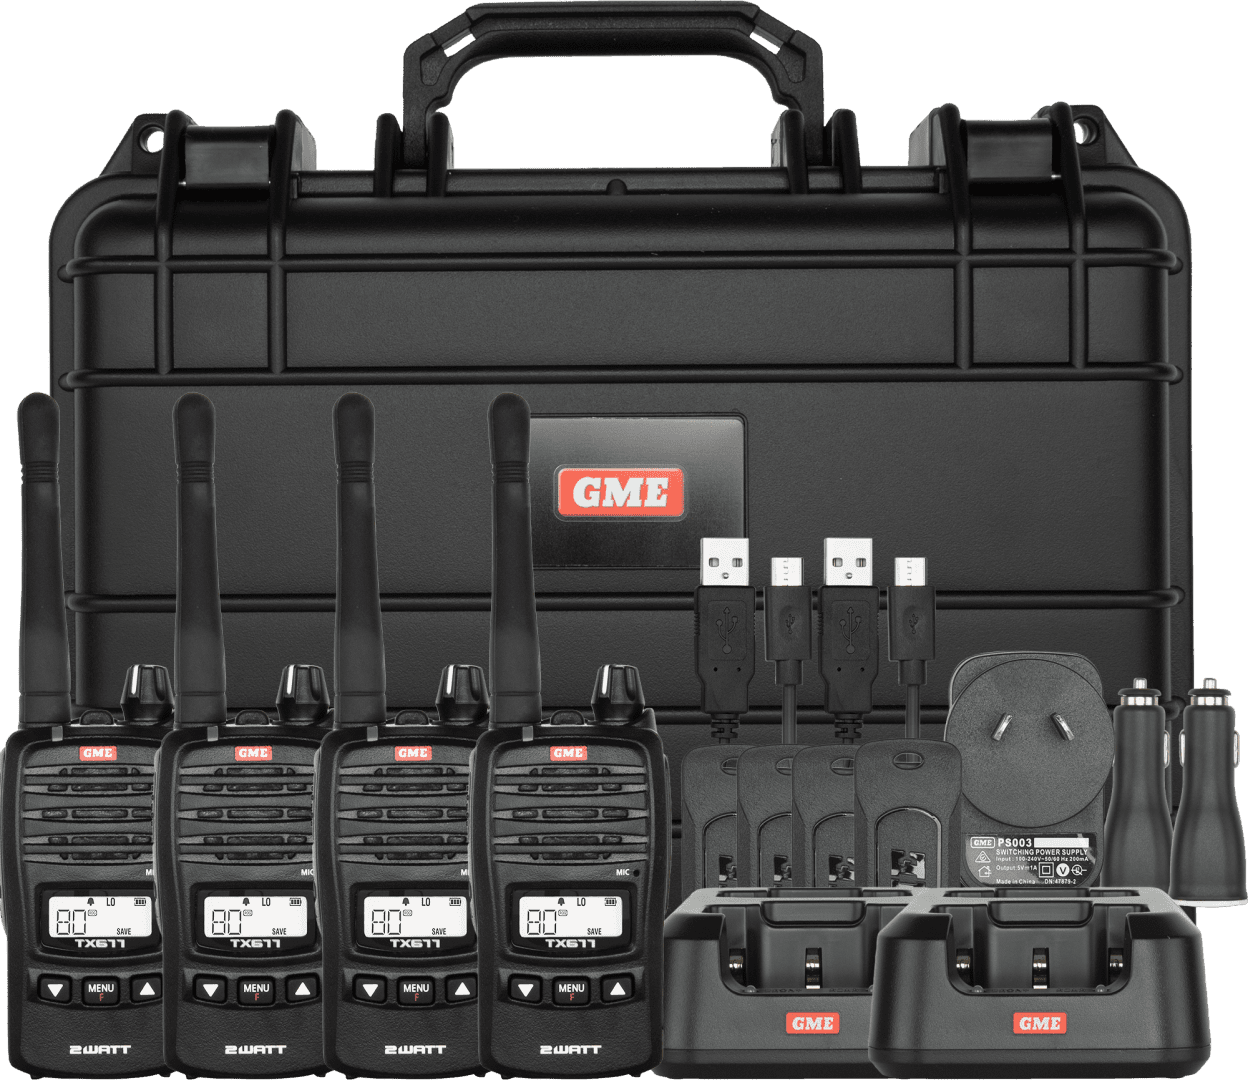 gme tx677 UHF CB radio quad pack with charger, case and accessories